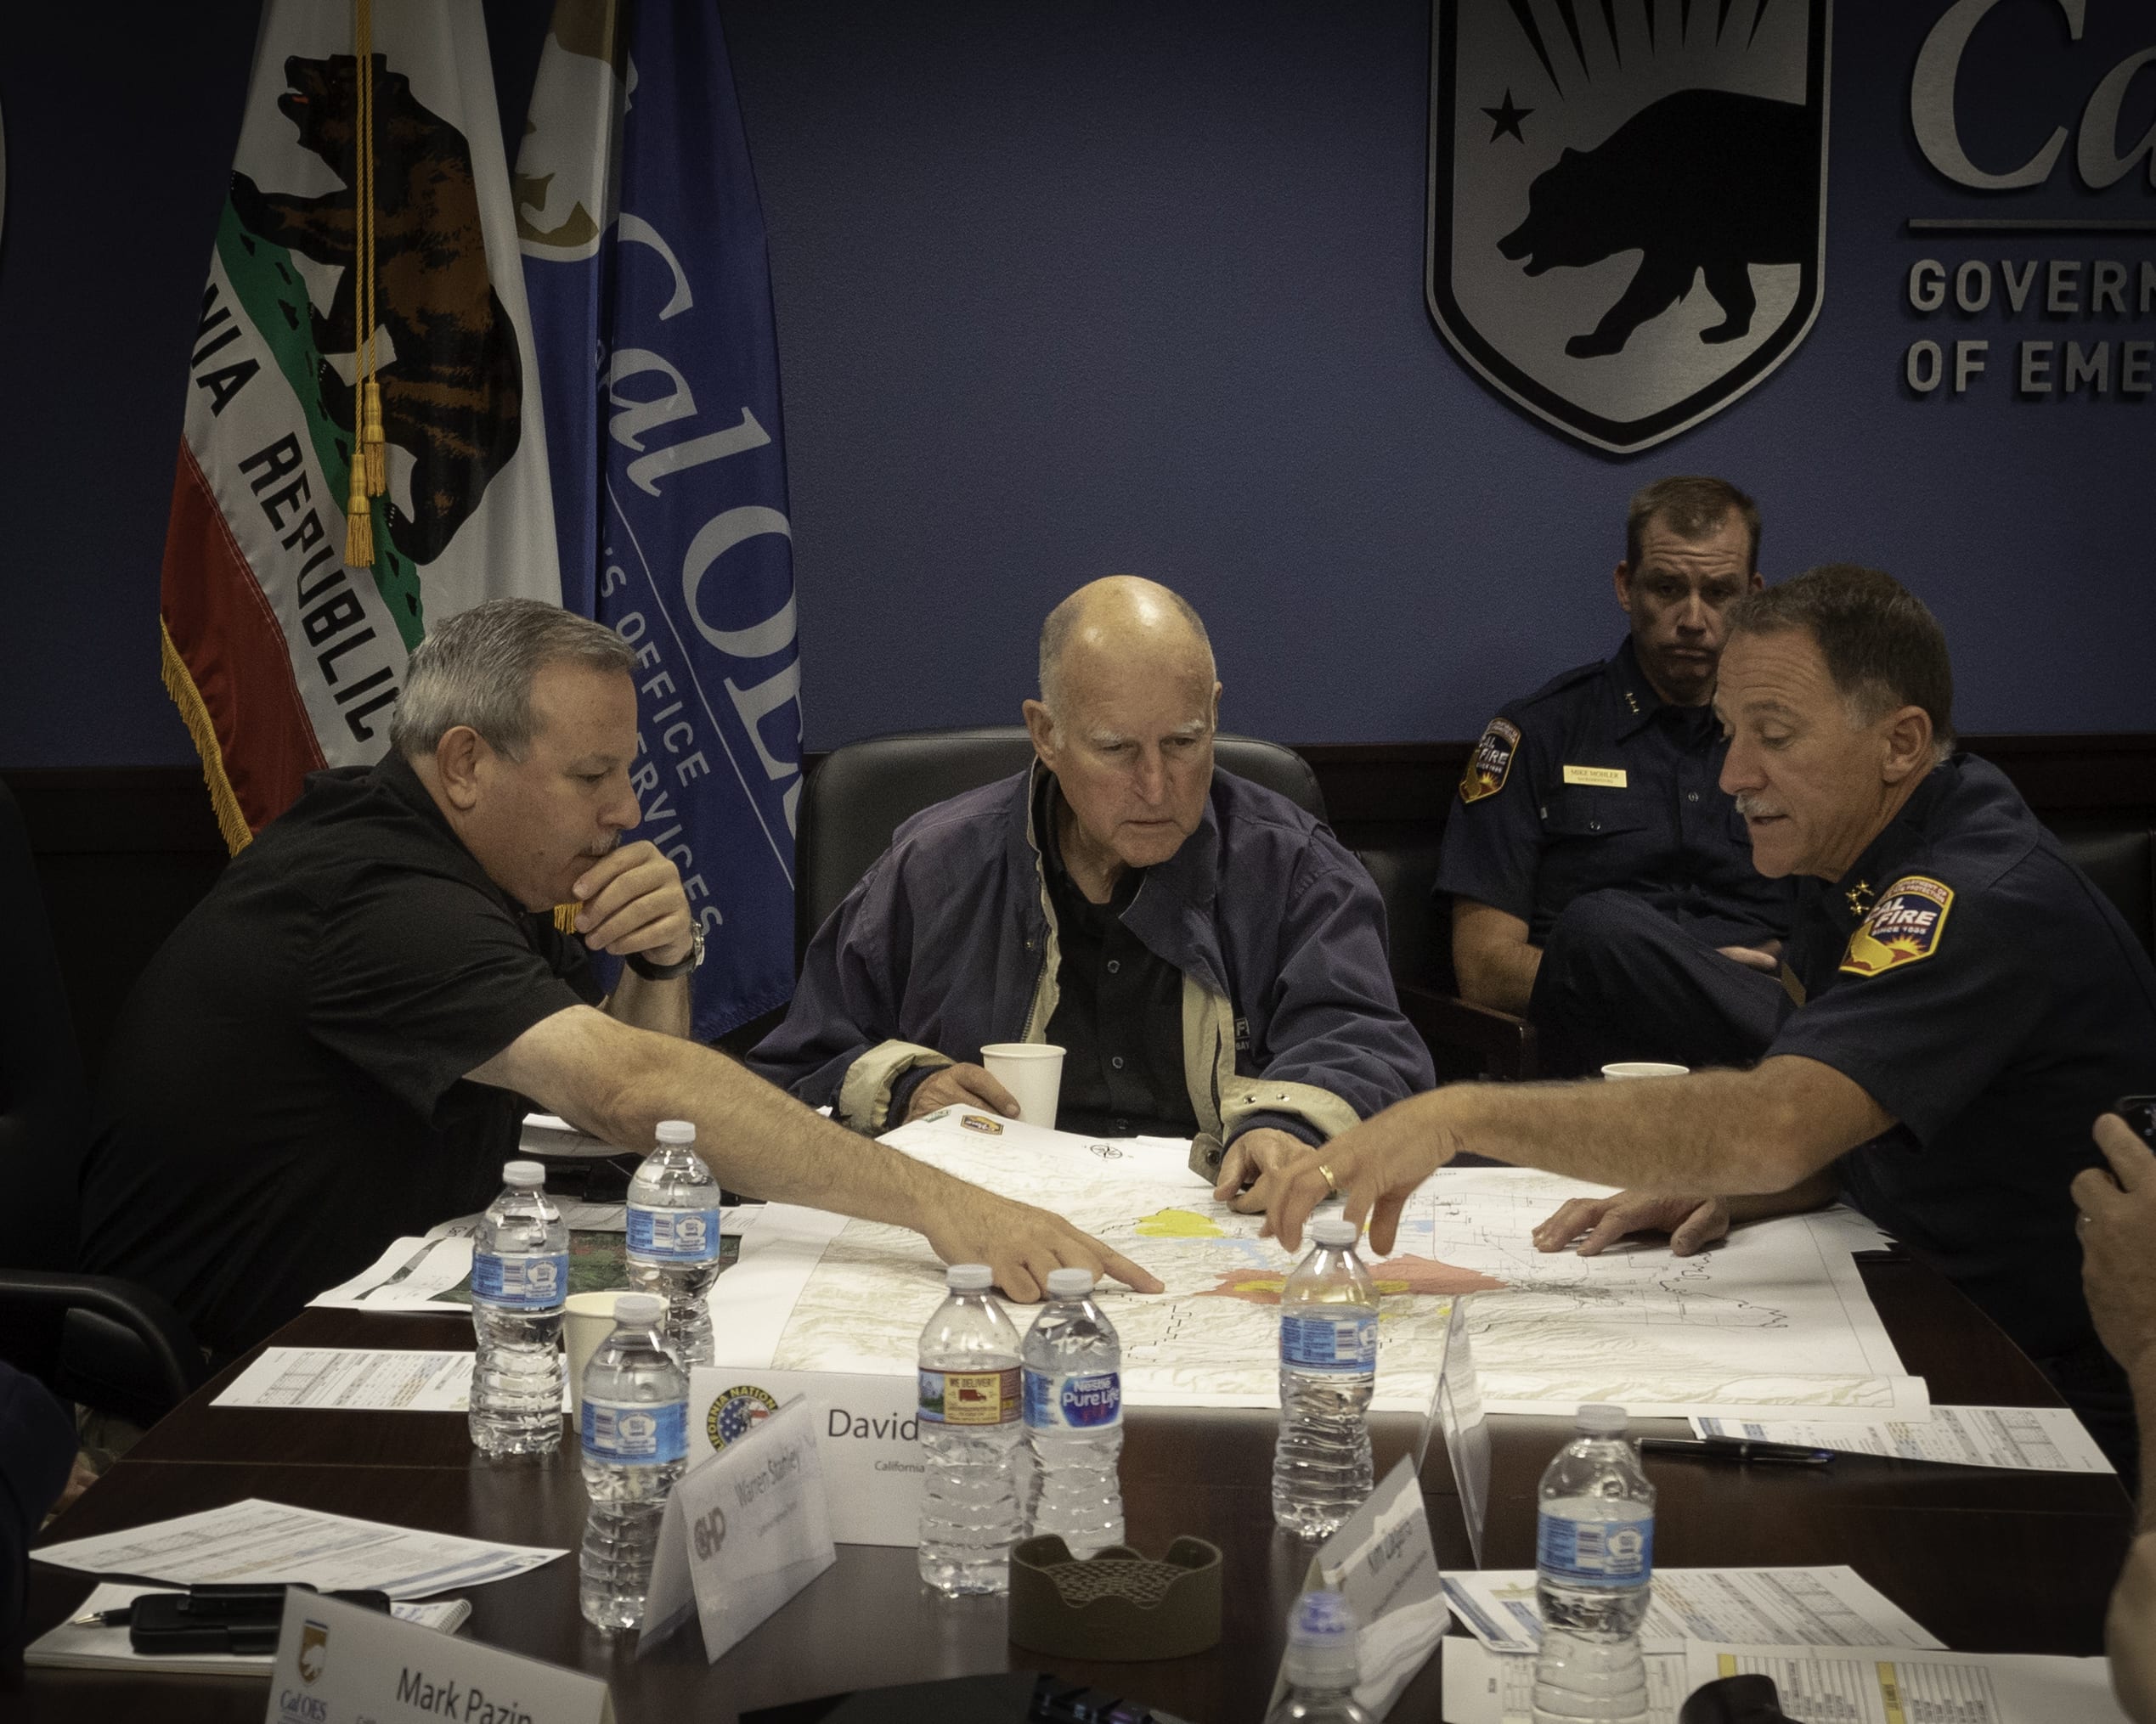 Governor Brown Secures Presidential Major Disaster Declaration to Support Communities Impacted by Wildfires